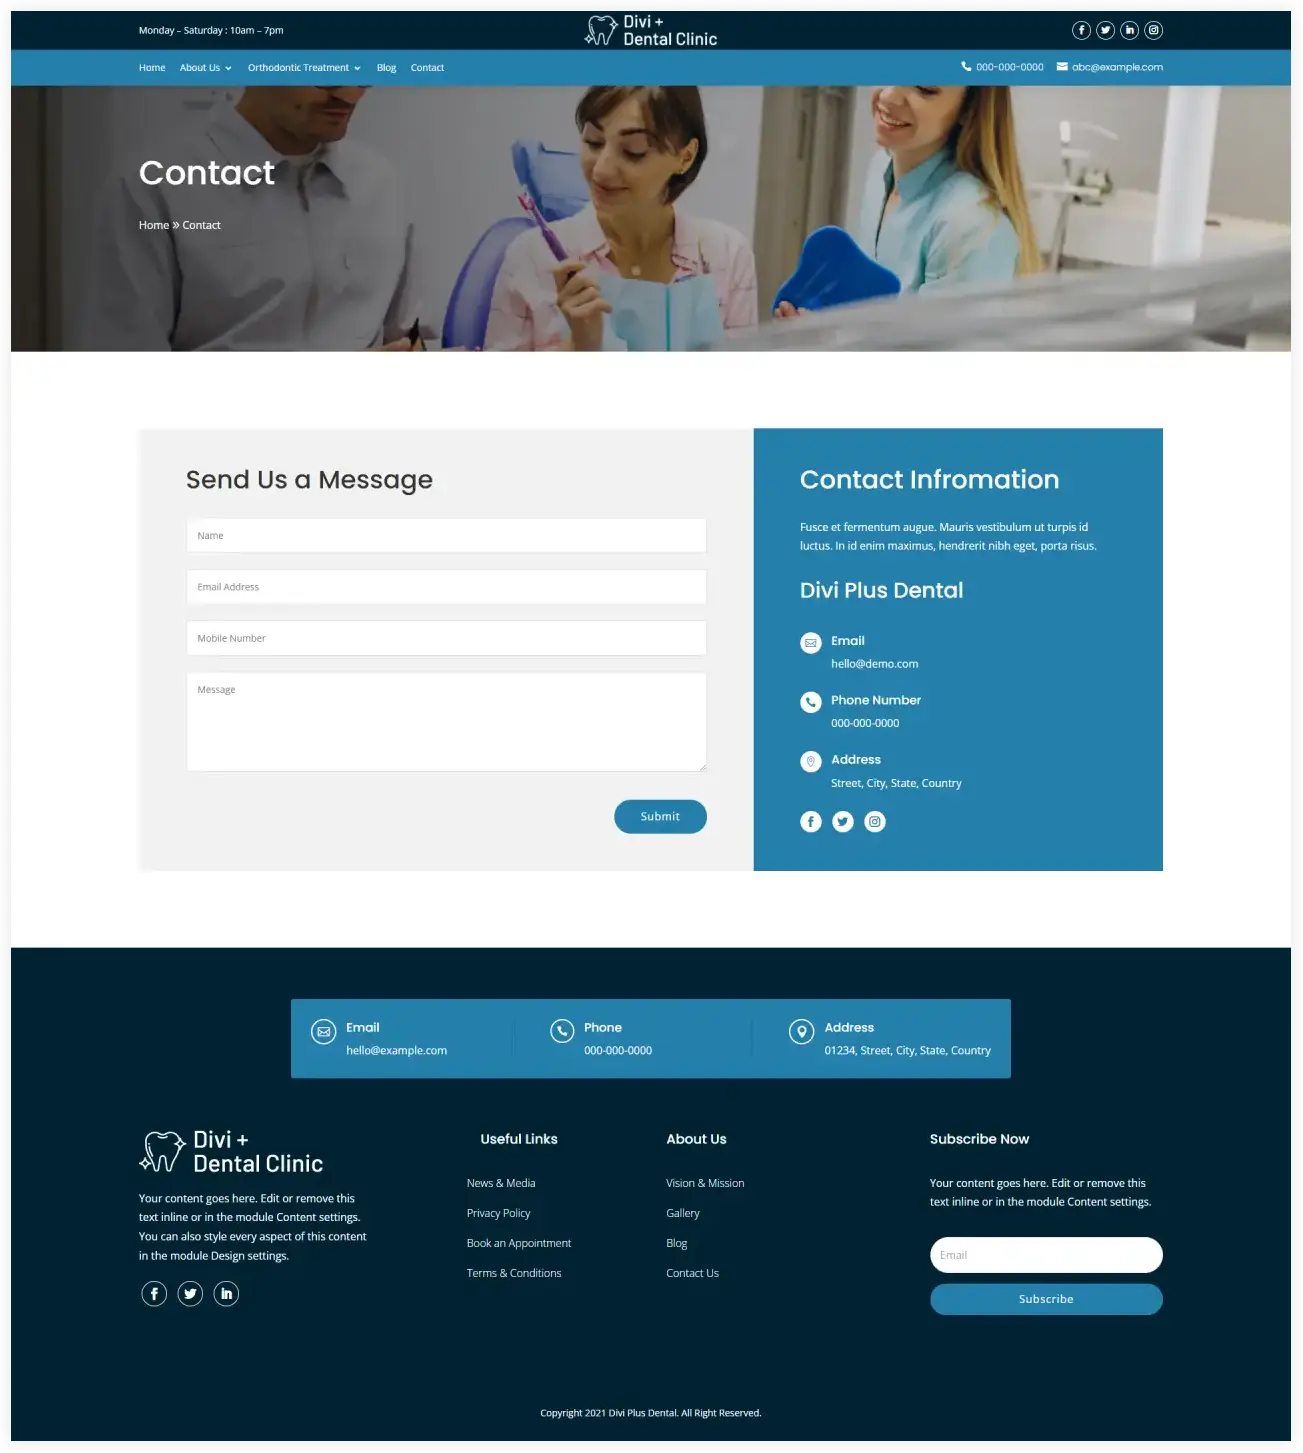 Divi Dental child theme contact layout